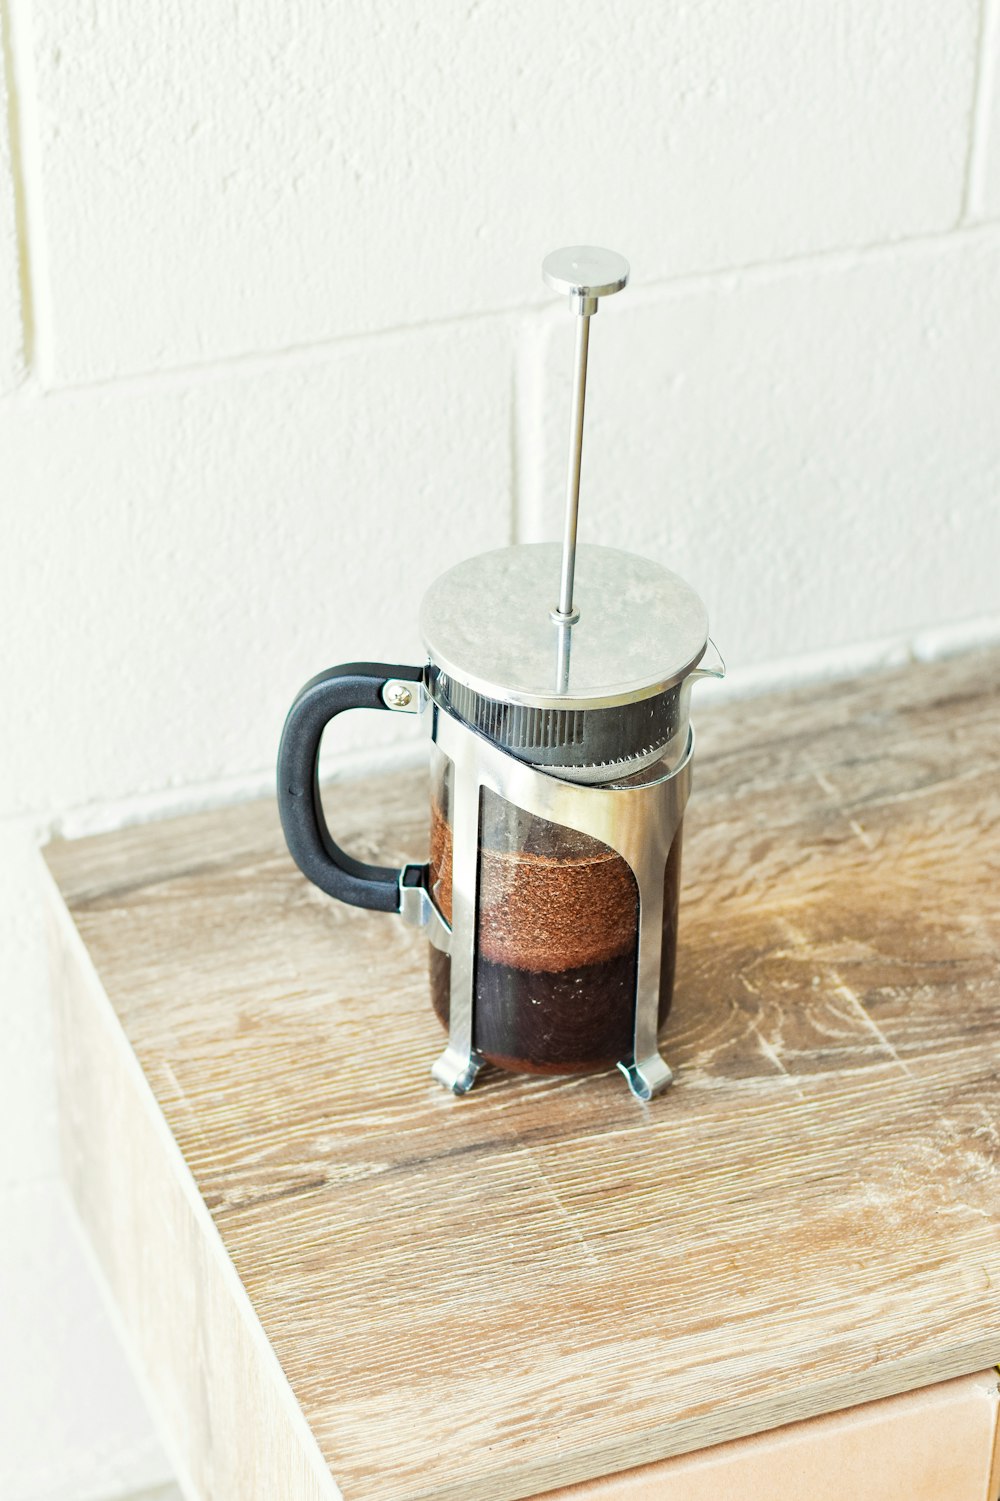 a french press coffee maker on a wooden table